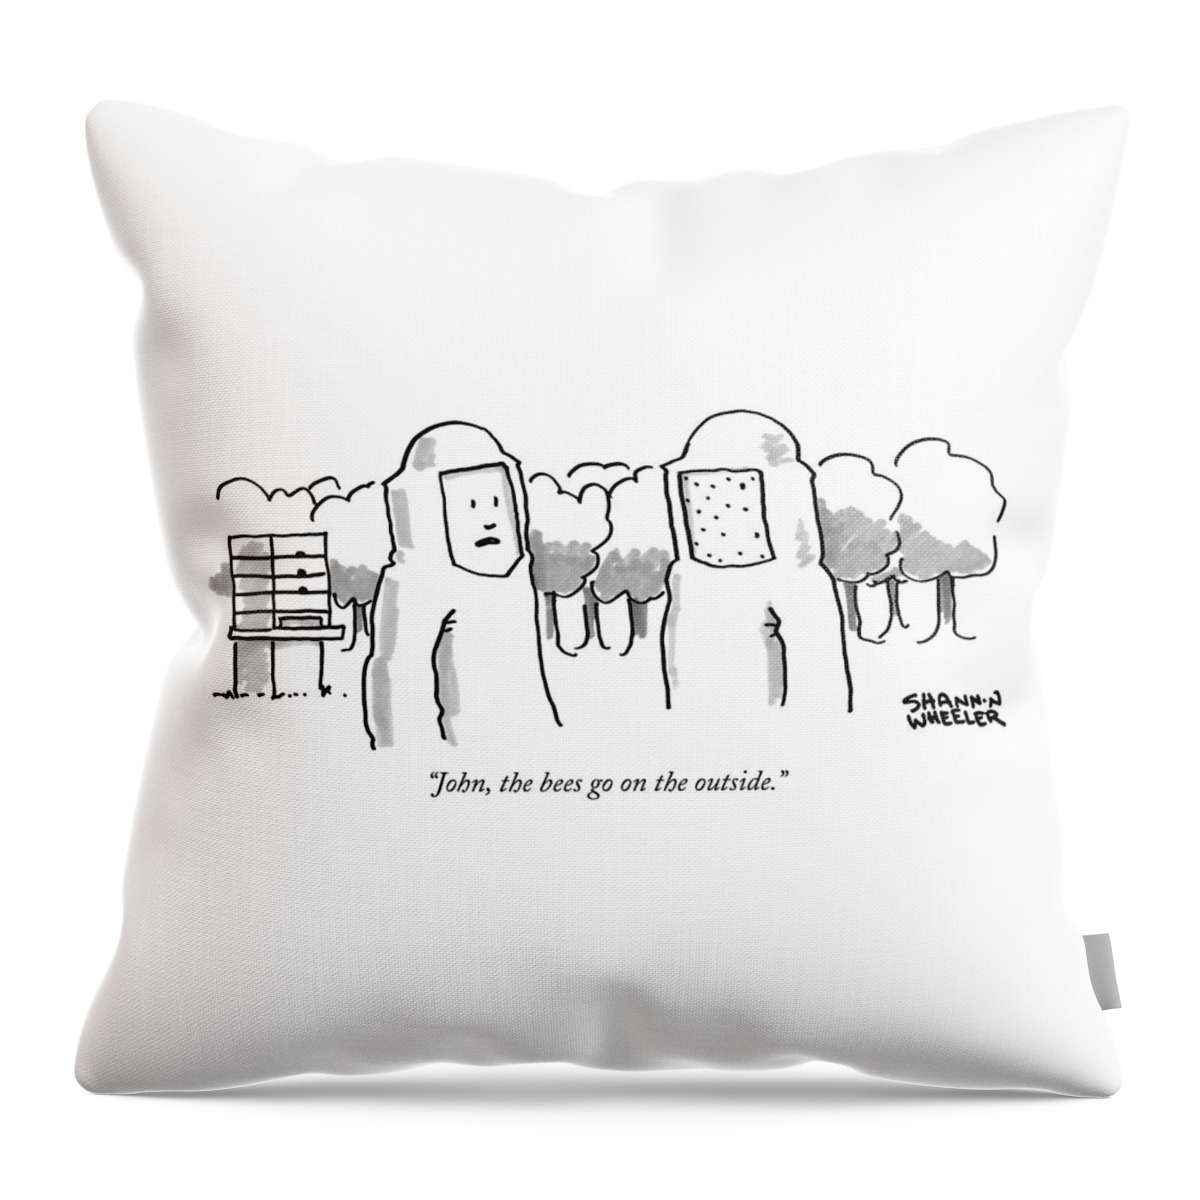 The Bees Go On The Outside Throw Pillow